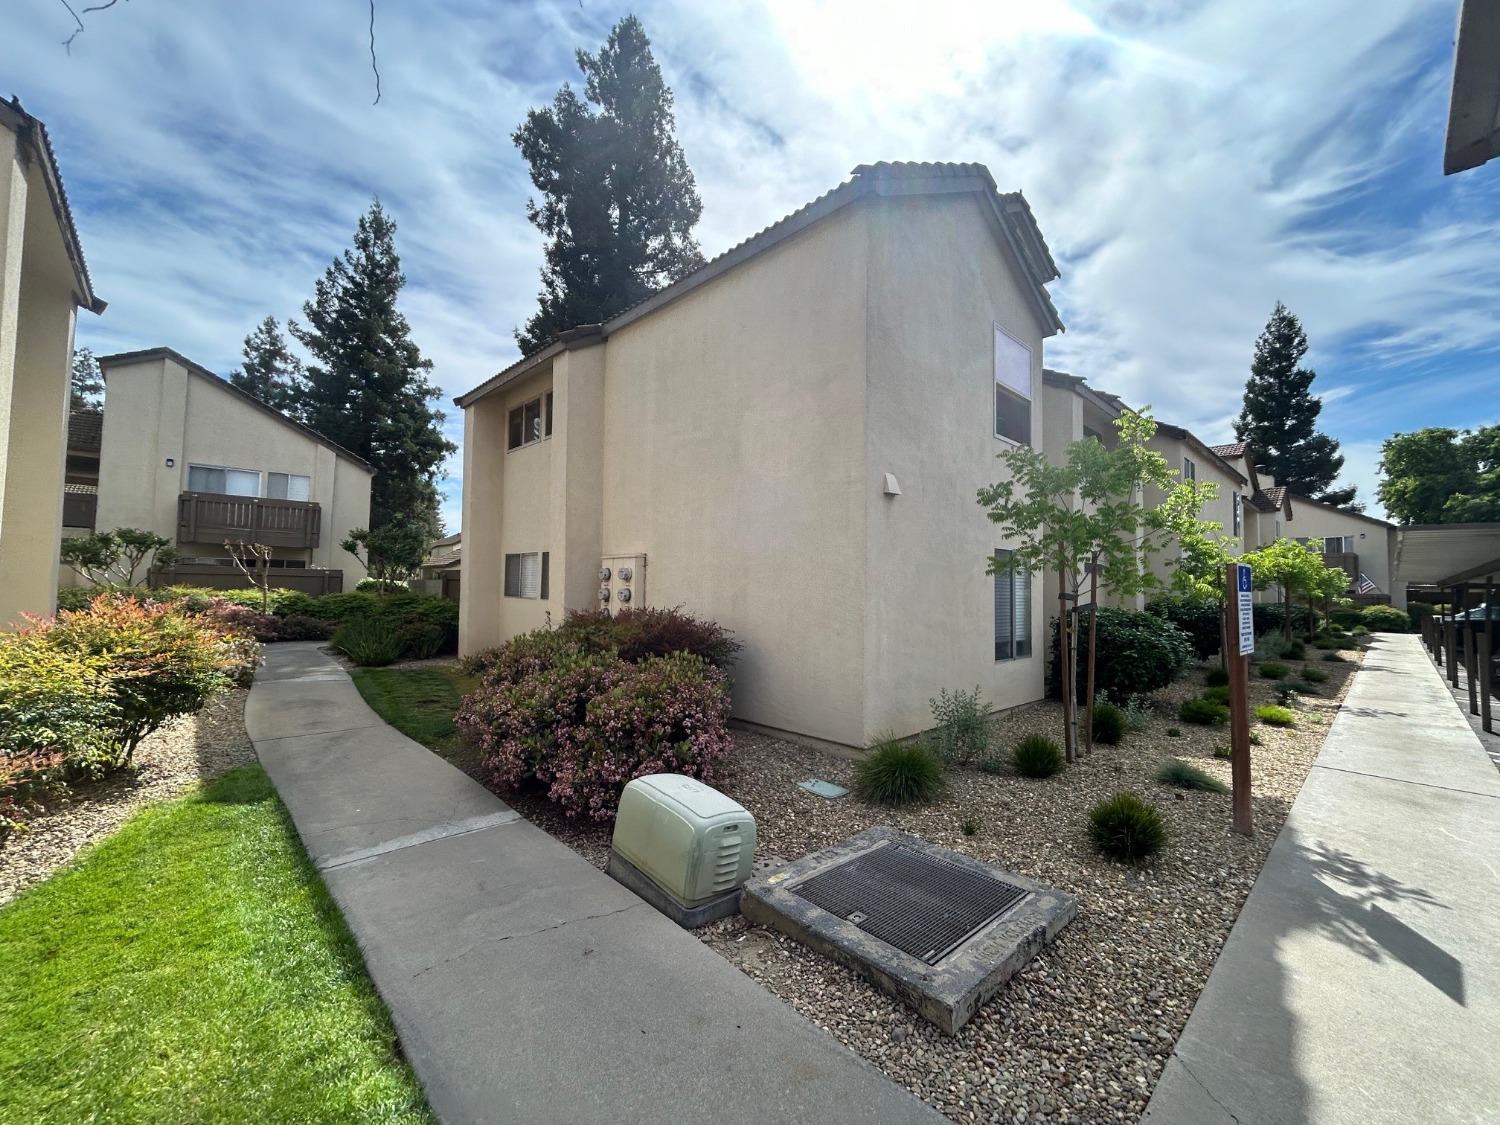 Photo of 3700 Tully Rd #57 in Modesto, CA